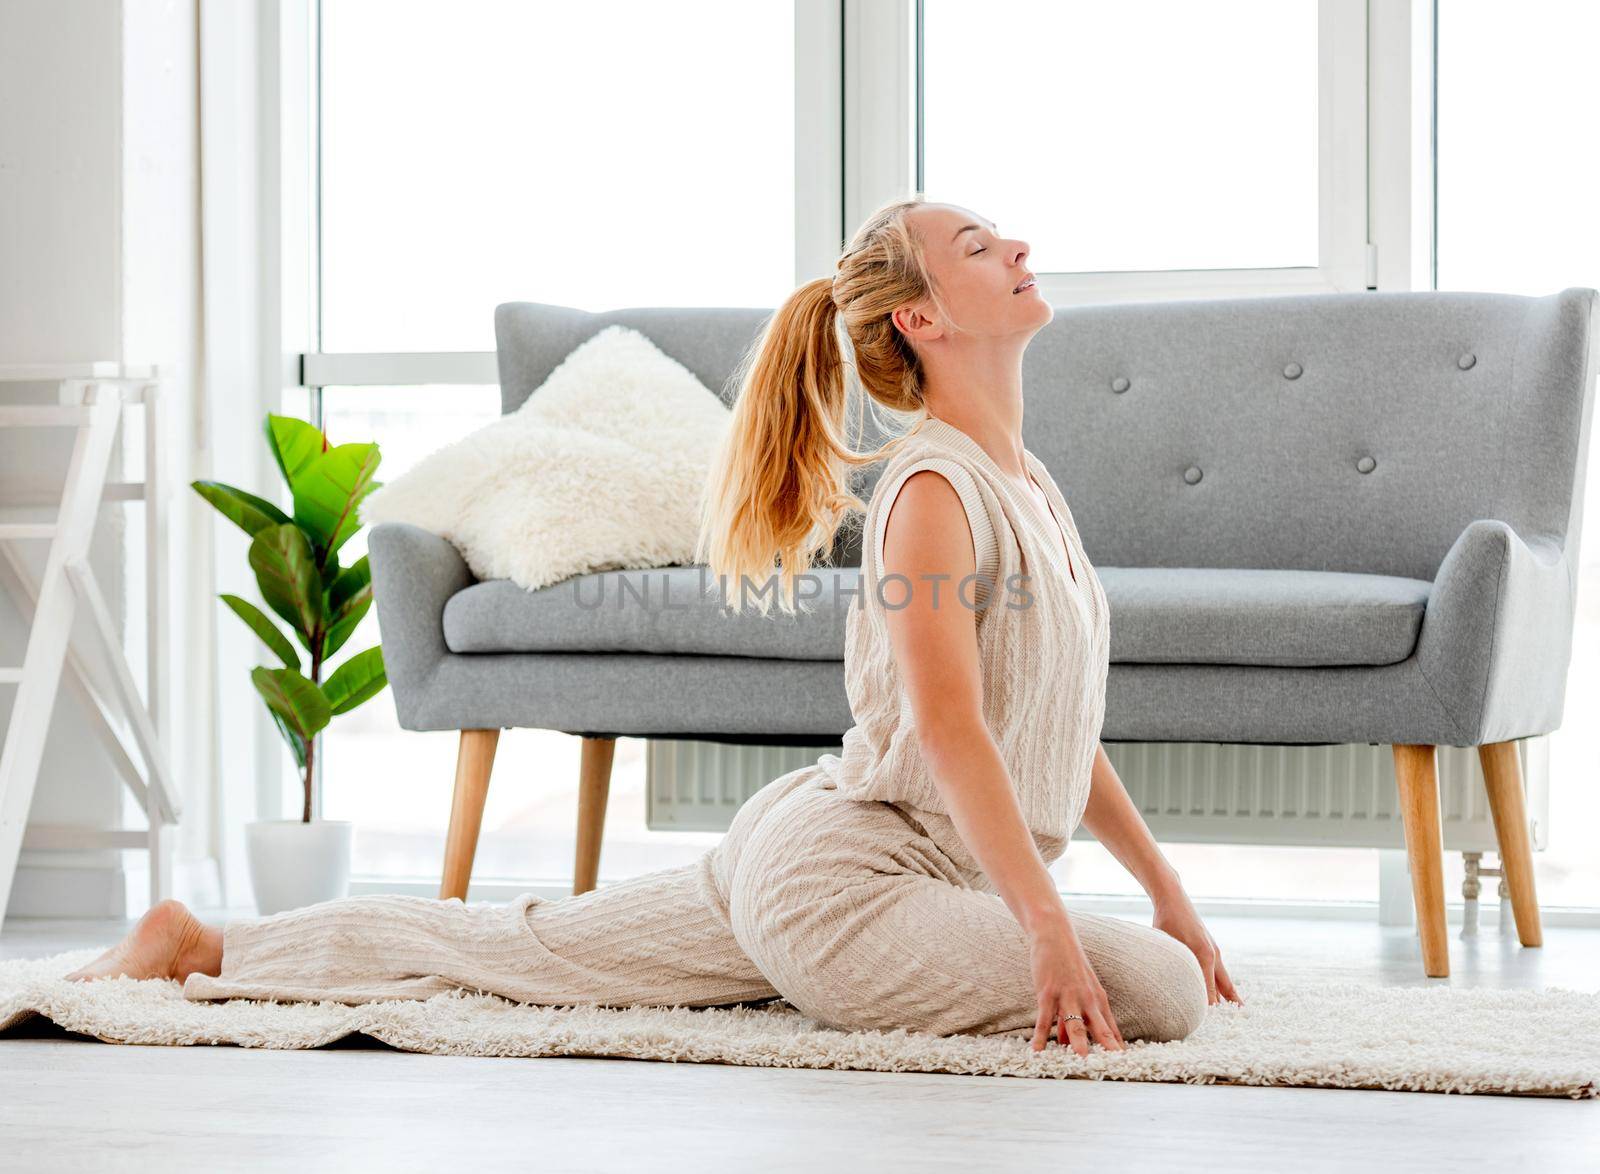 Beautiful blond girl stretch her body during morning yoga workout in the room with sunlight